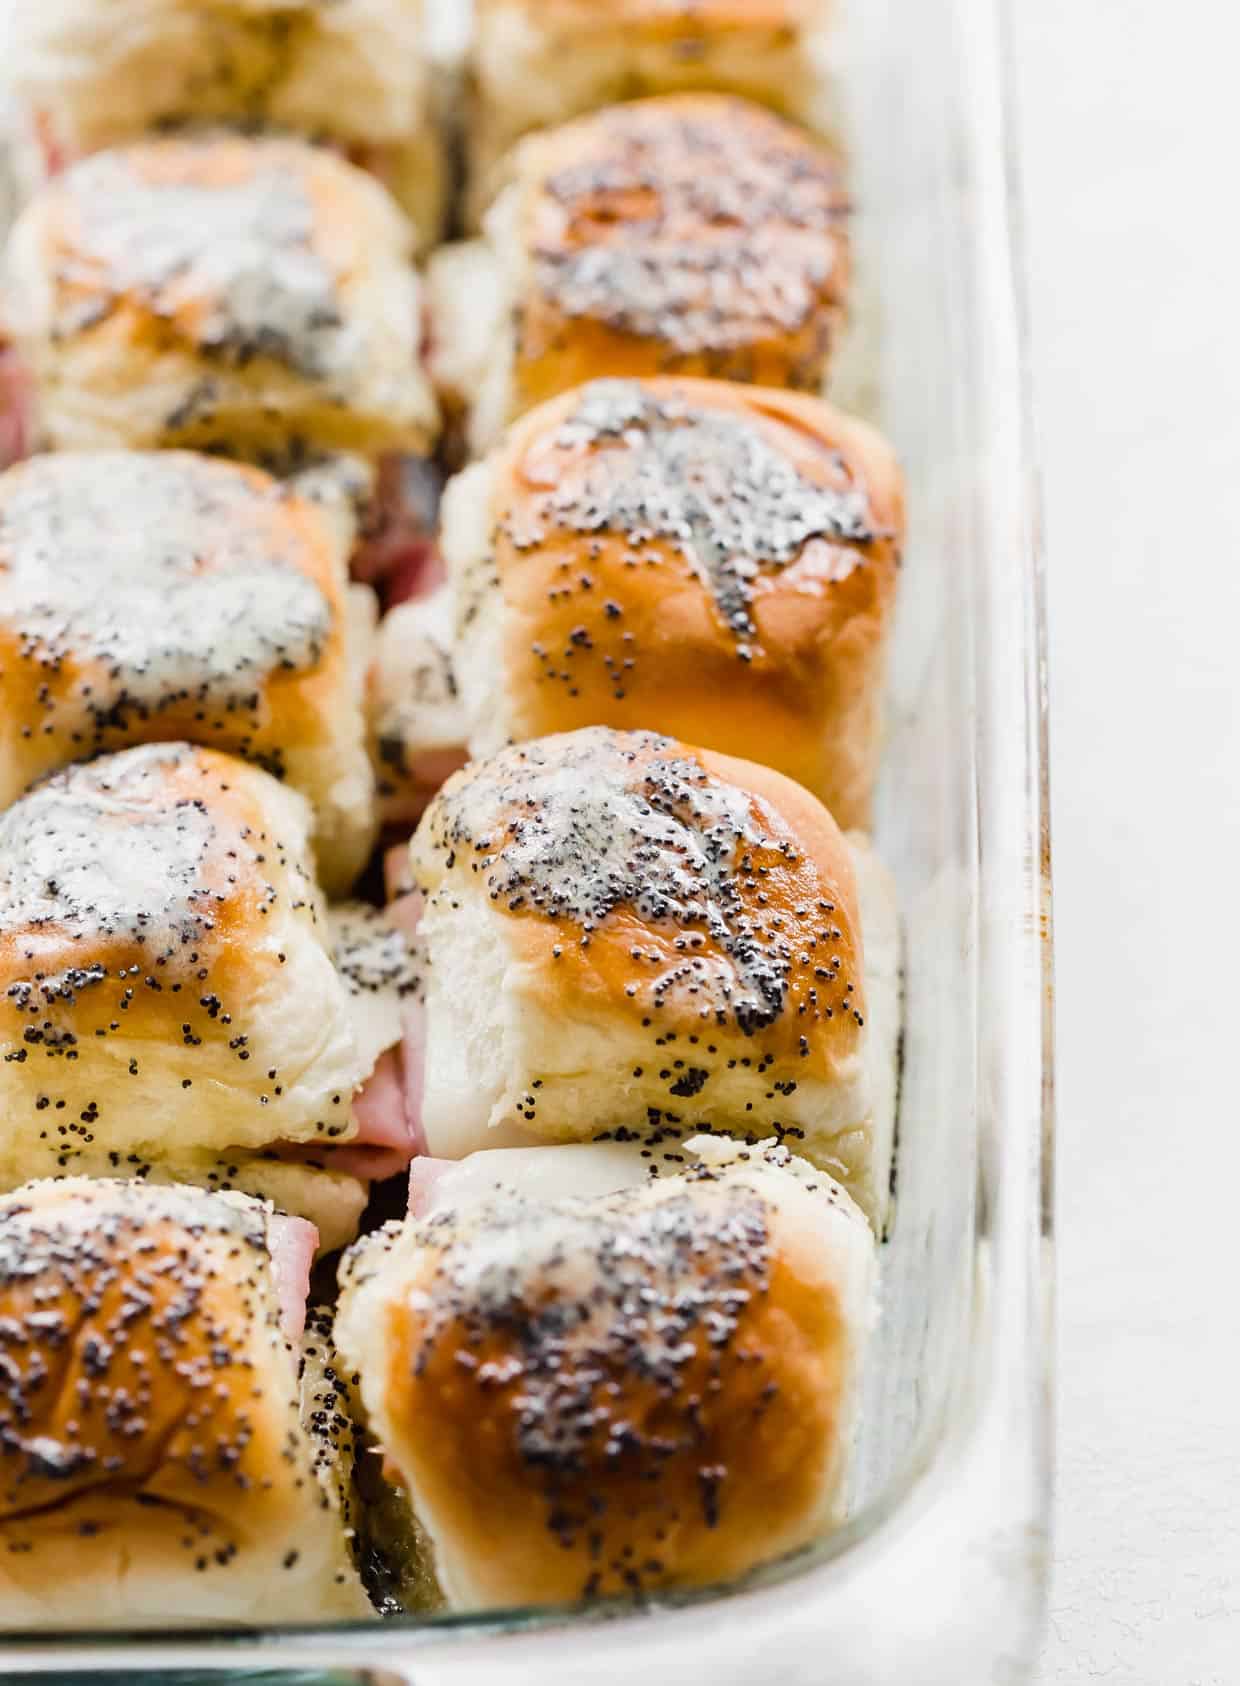 Honey Mustard Ham and Cheese Sliders made with Worcestershire sauce topped with a poppy seed dressing in a glass baking dish.